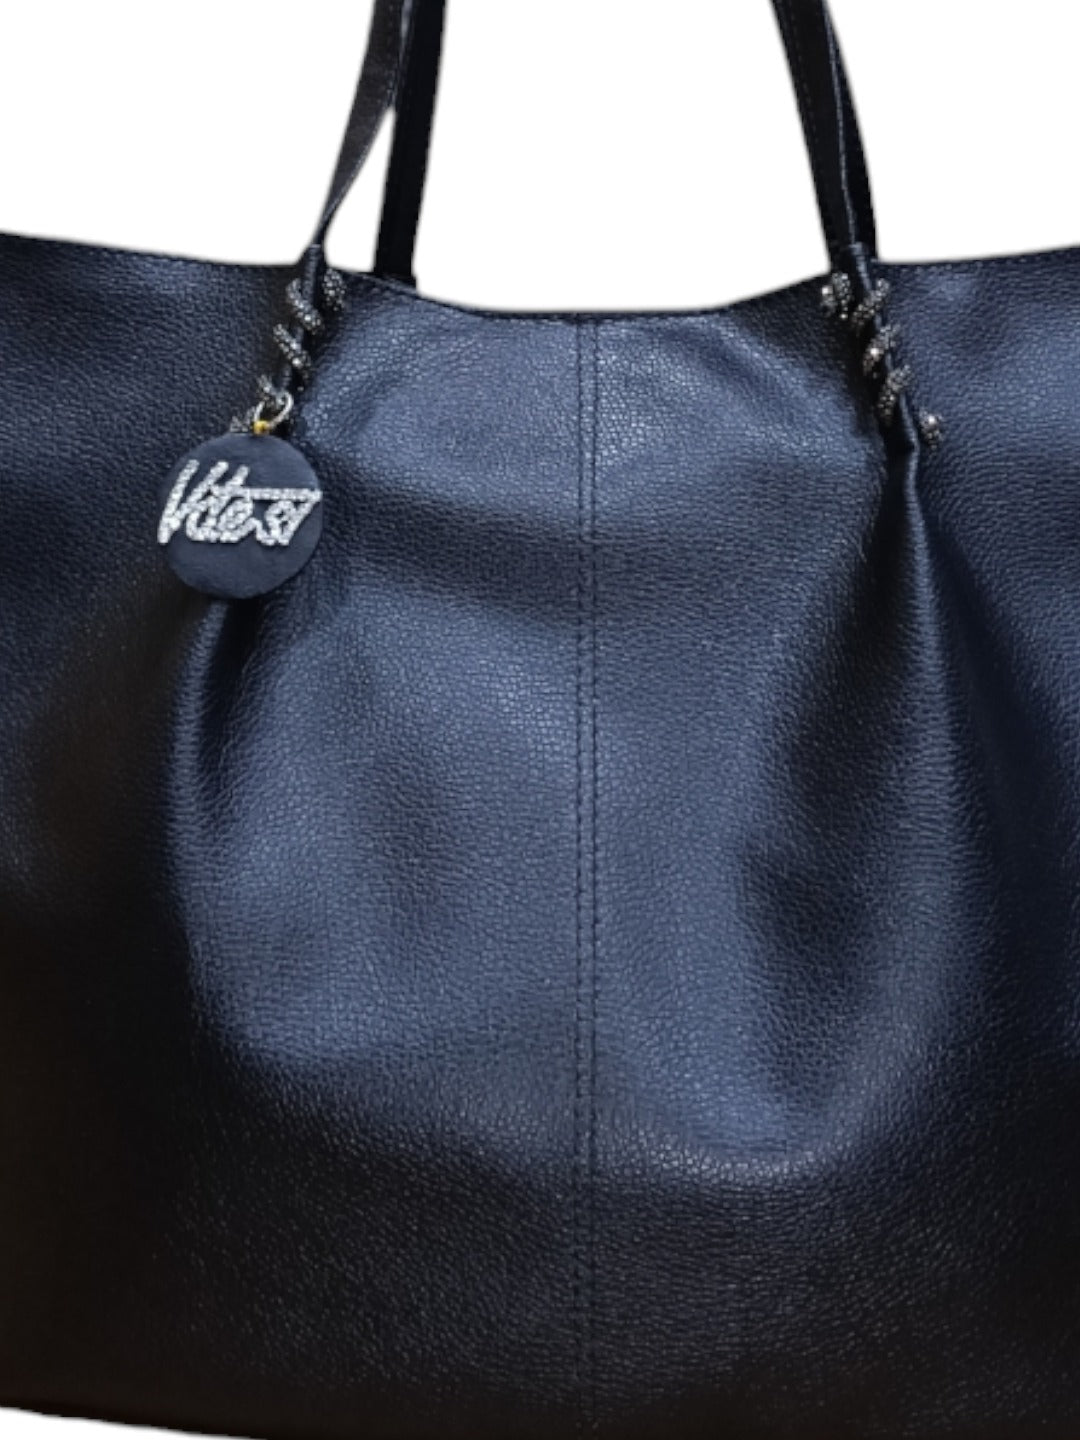 From workdays to weekends, our Tote Bag offers the perfect blend of style and convenience.